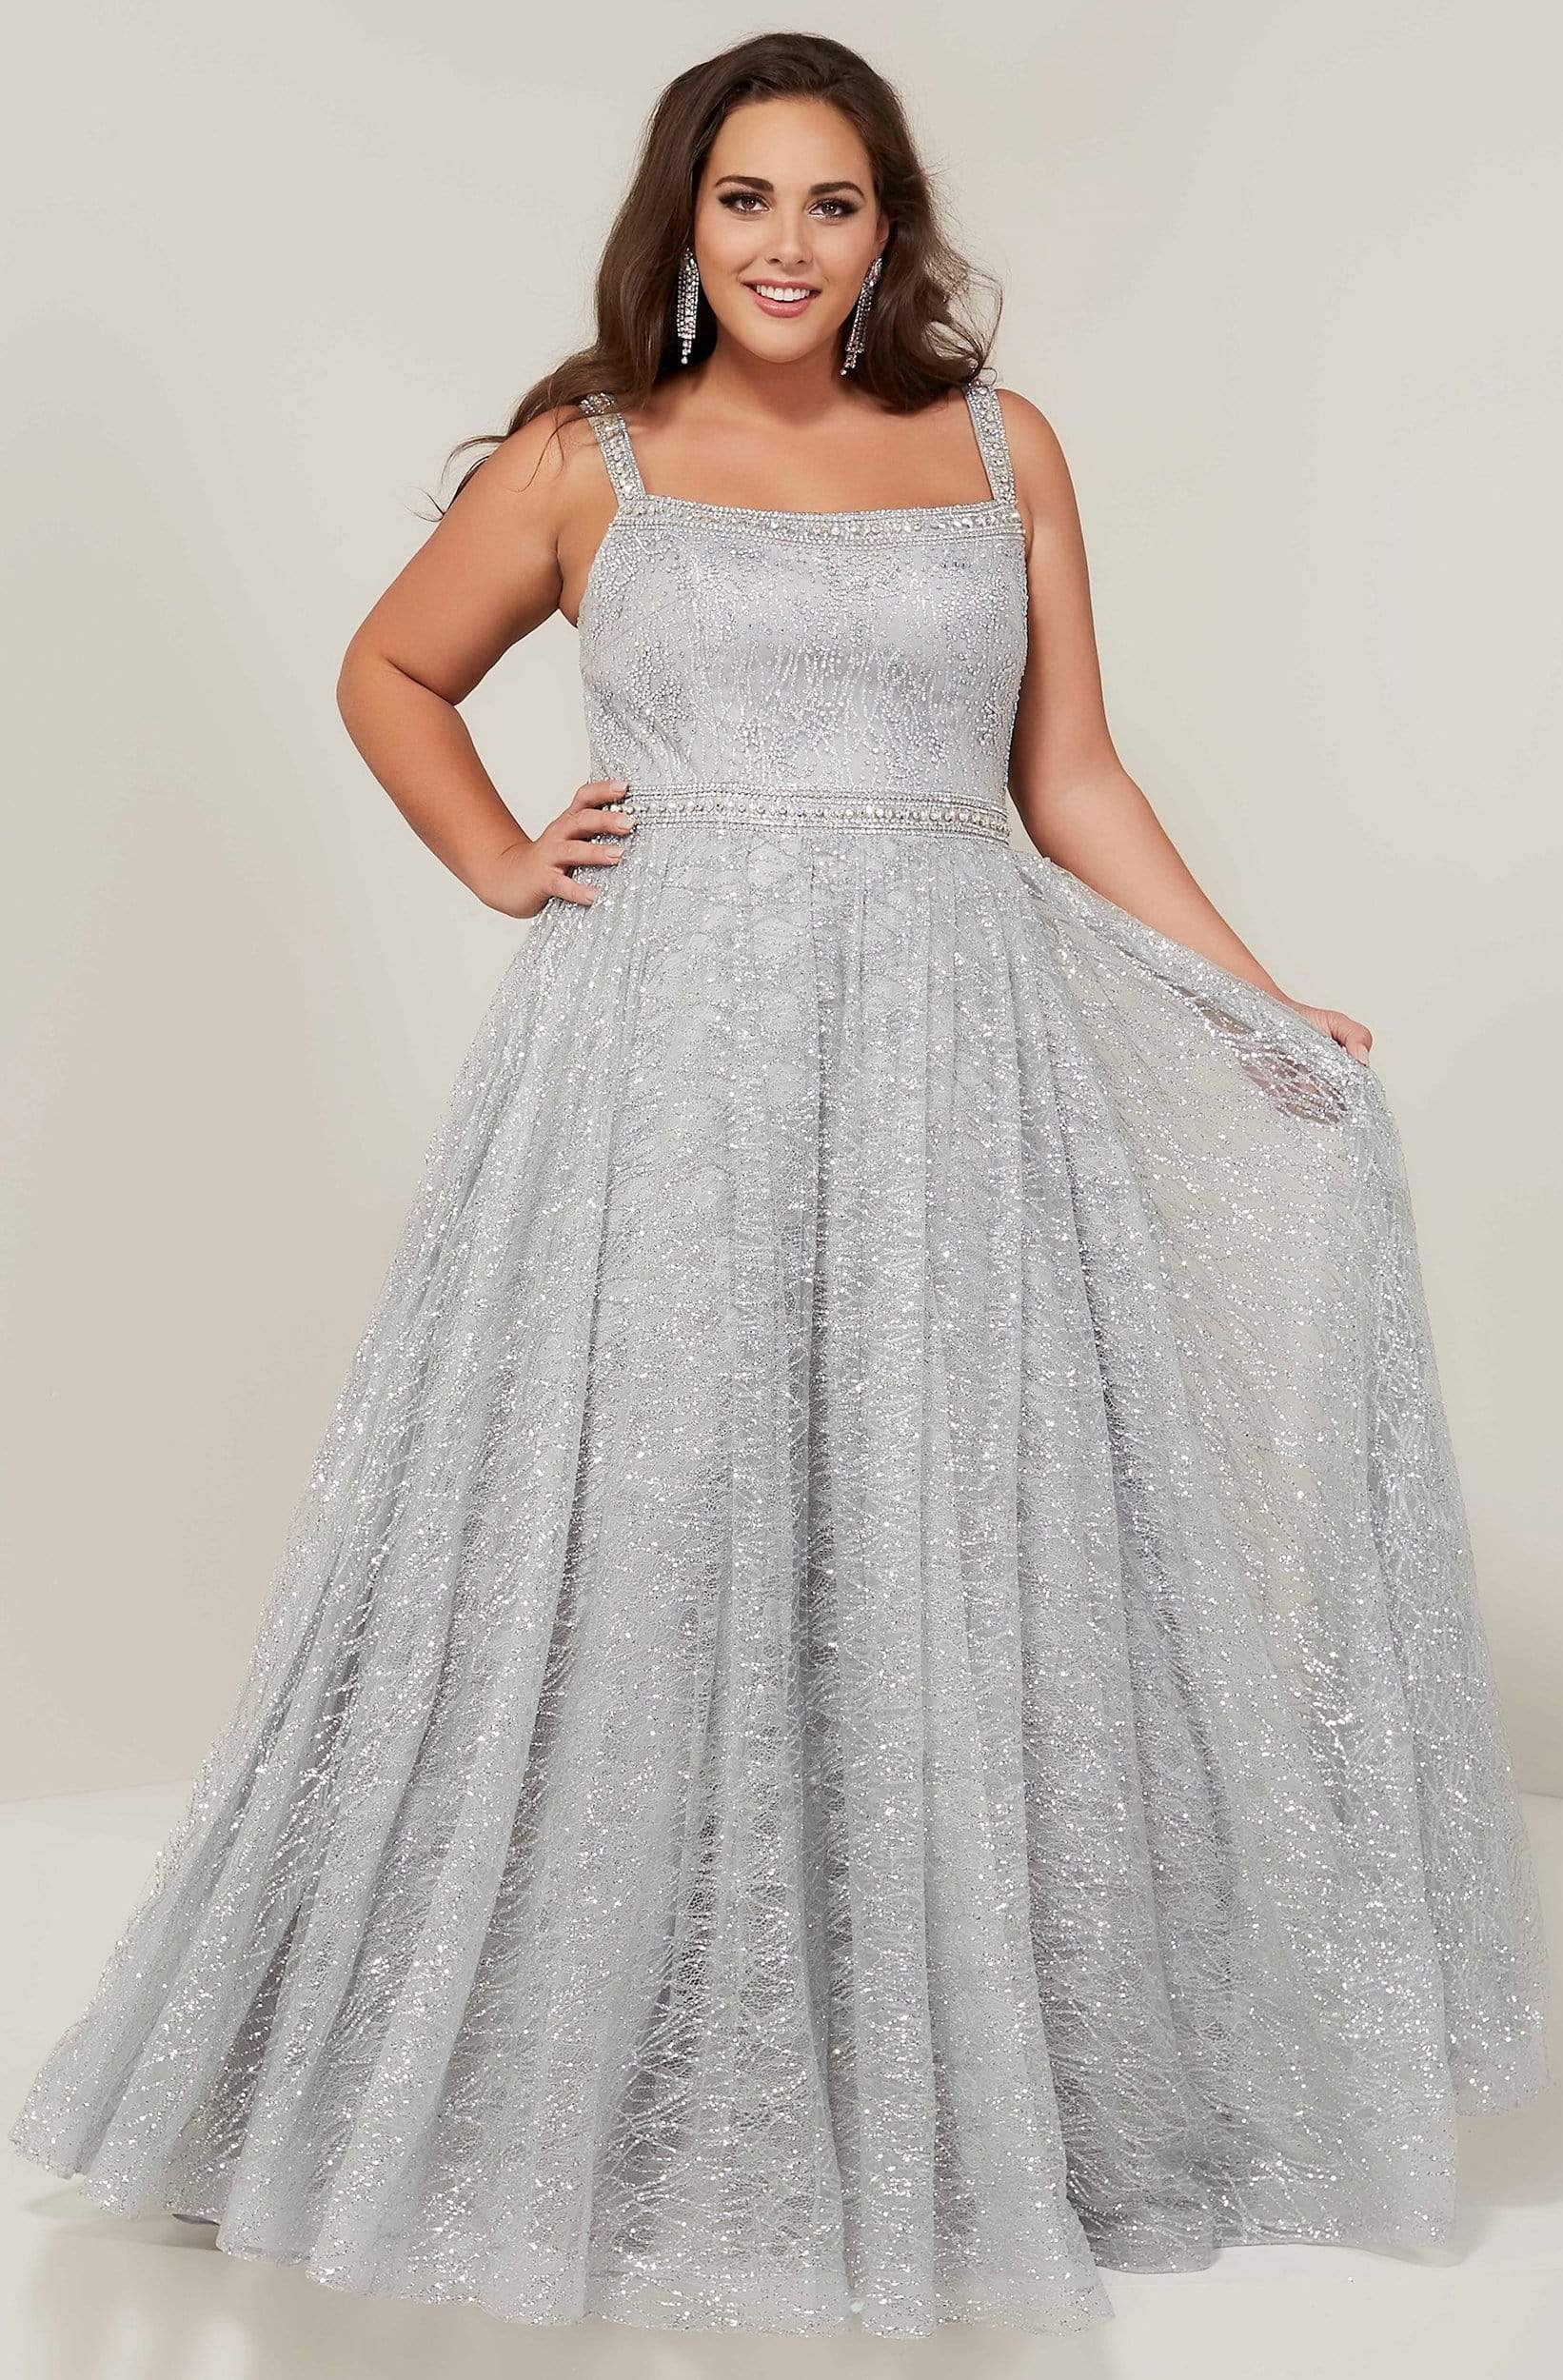 Image of Tiffany Designs - 16381 Beaded Sparkle Tulle A-line Dress